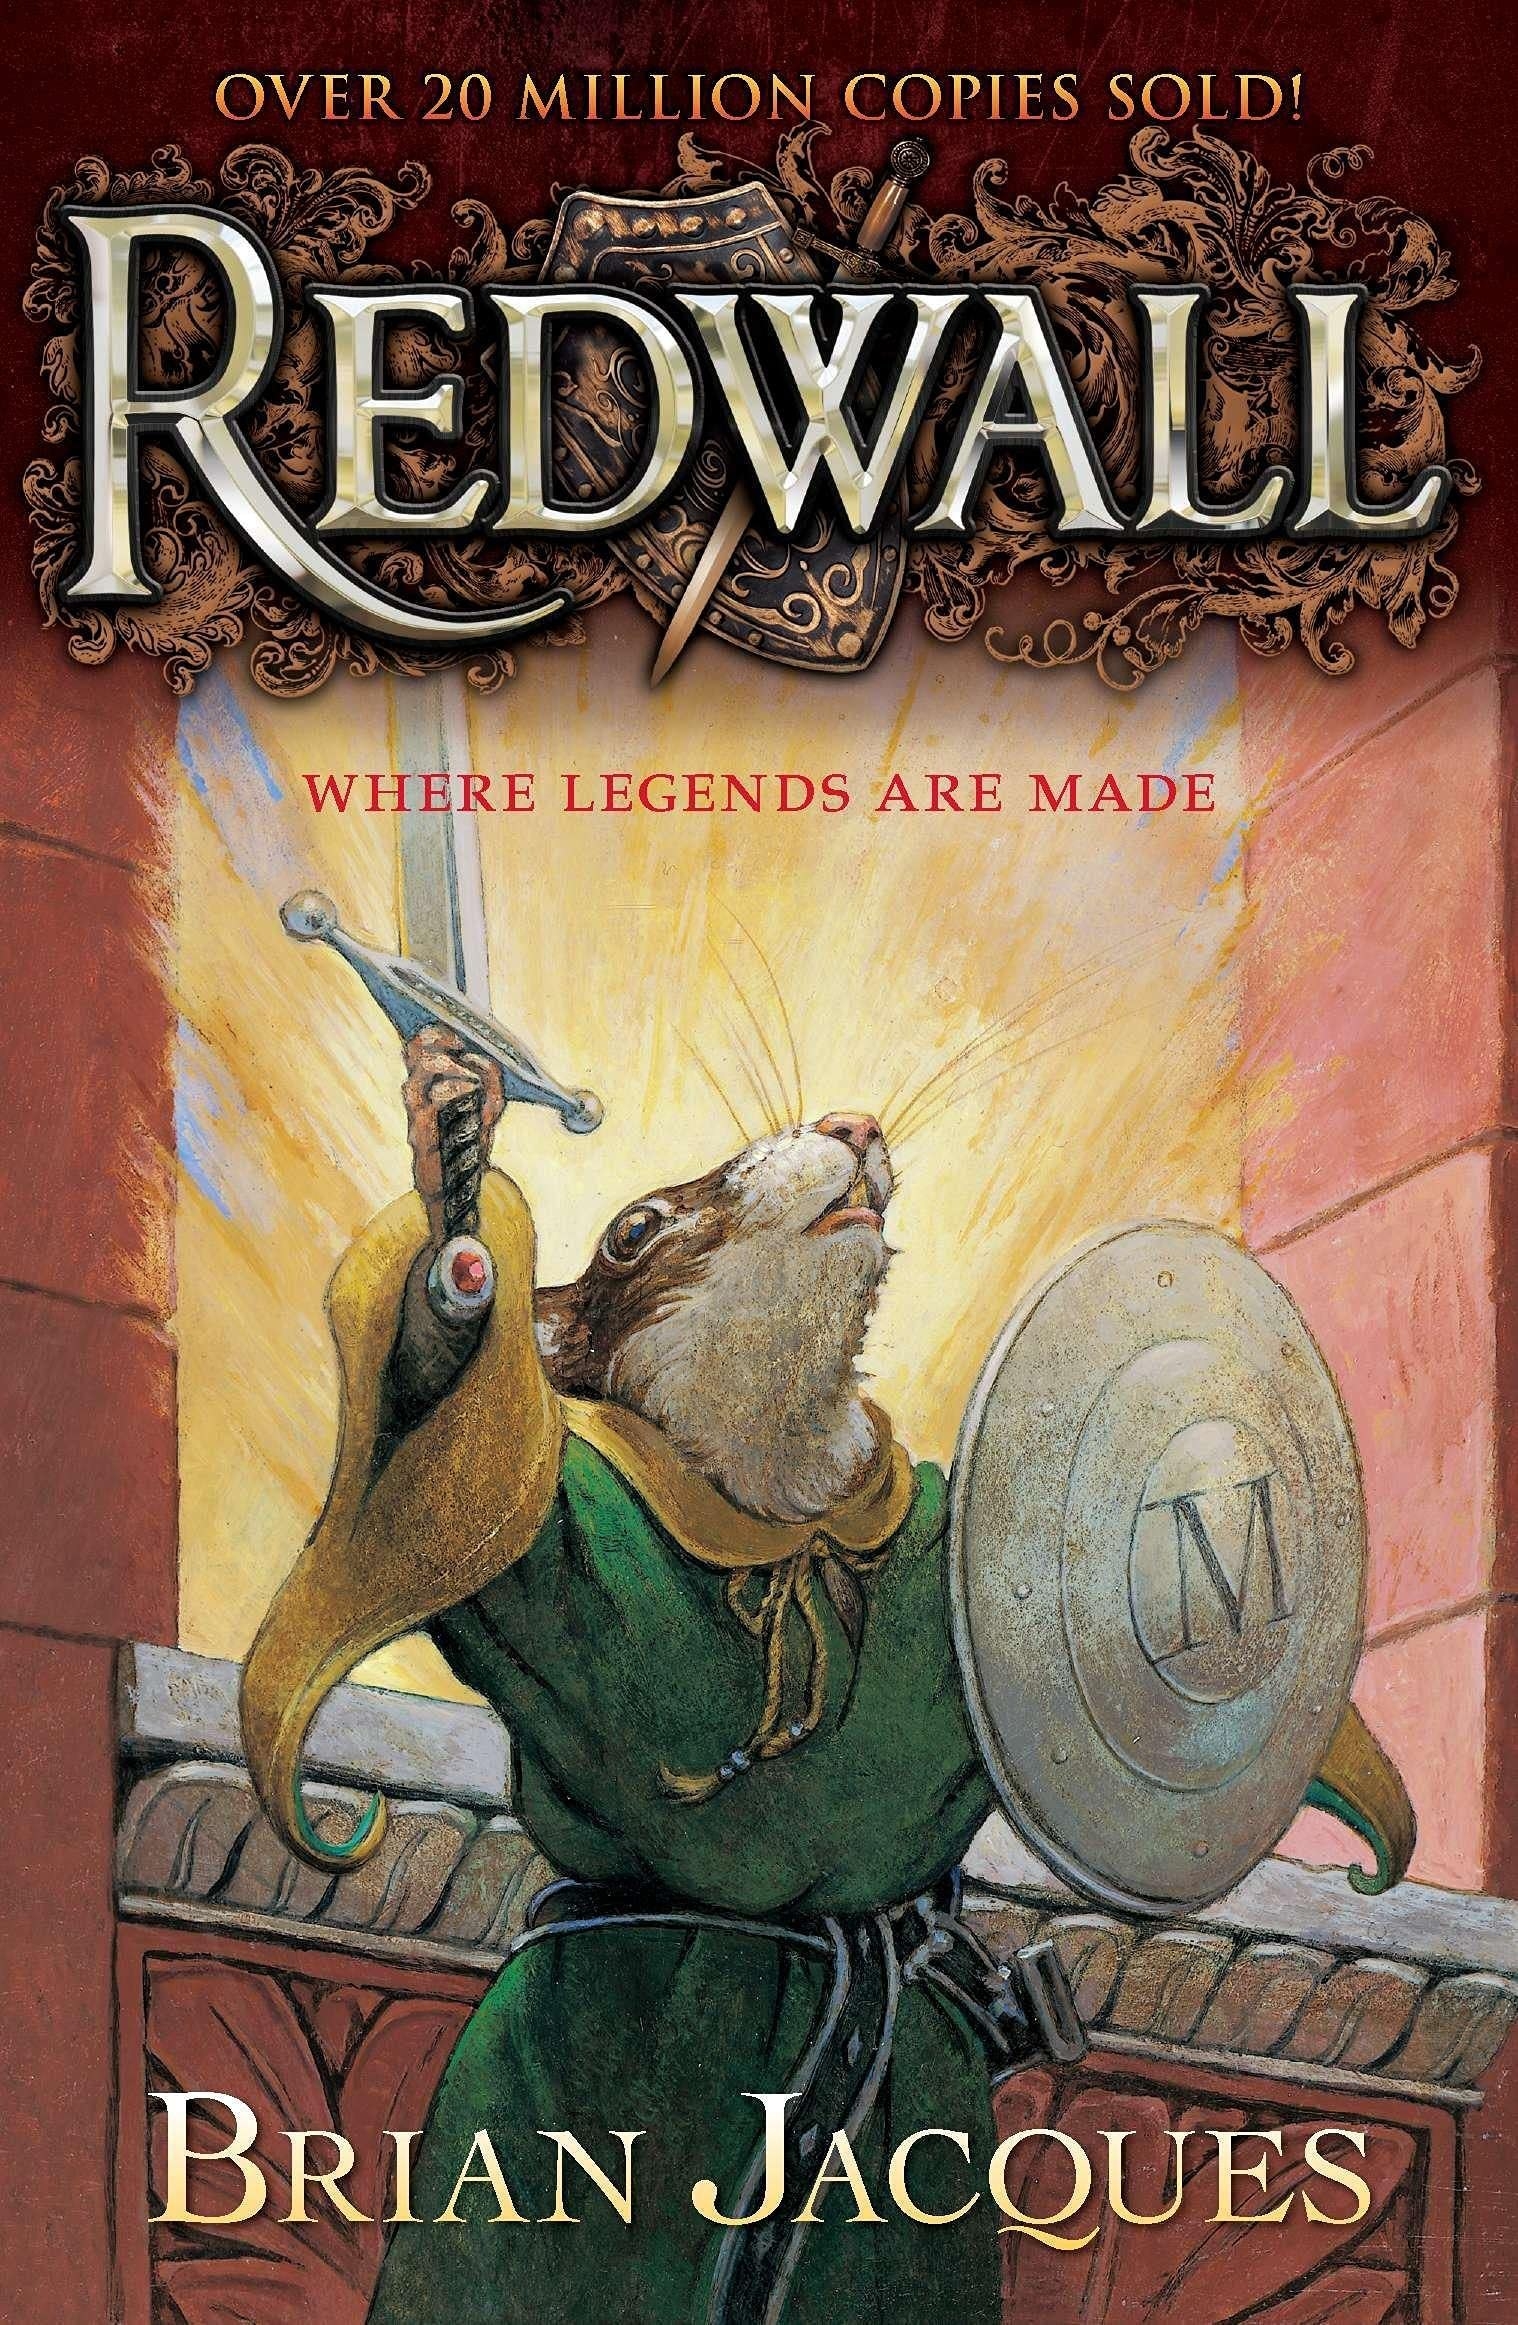 The cover of a book from &quot;Redwall&quot; series by Brian Jacques